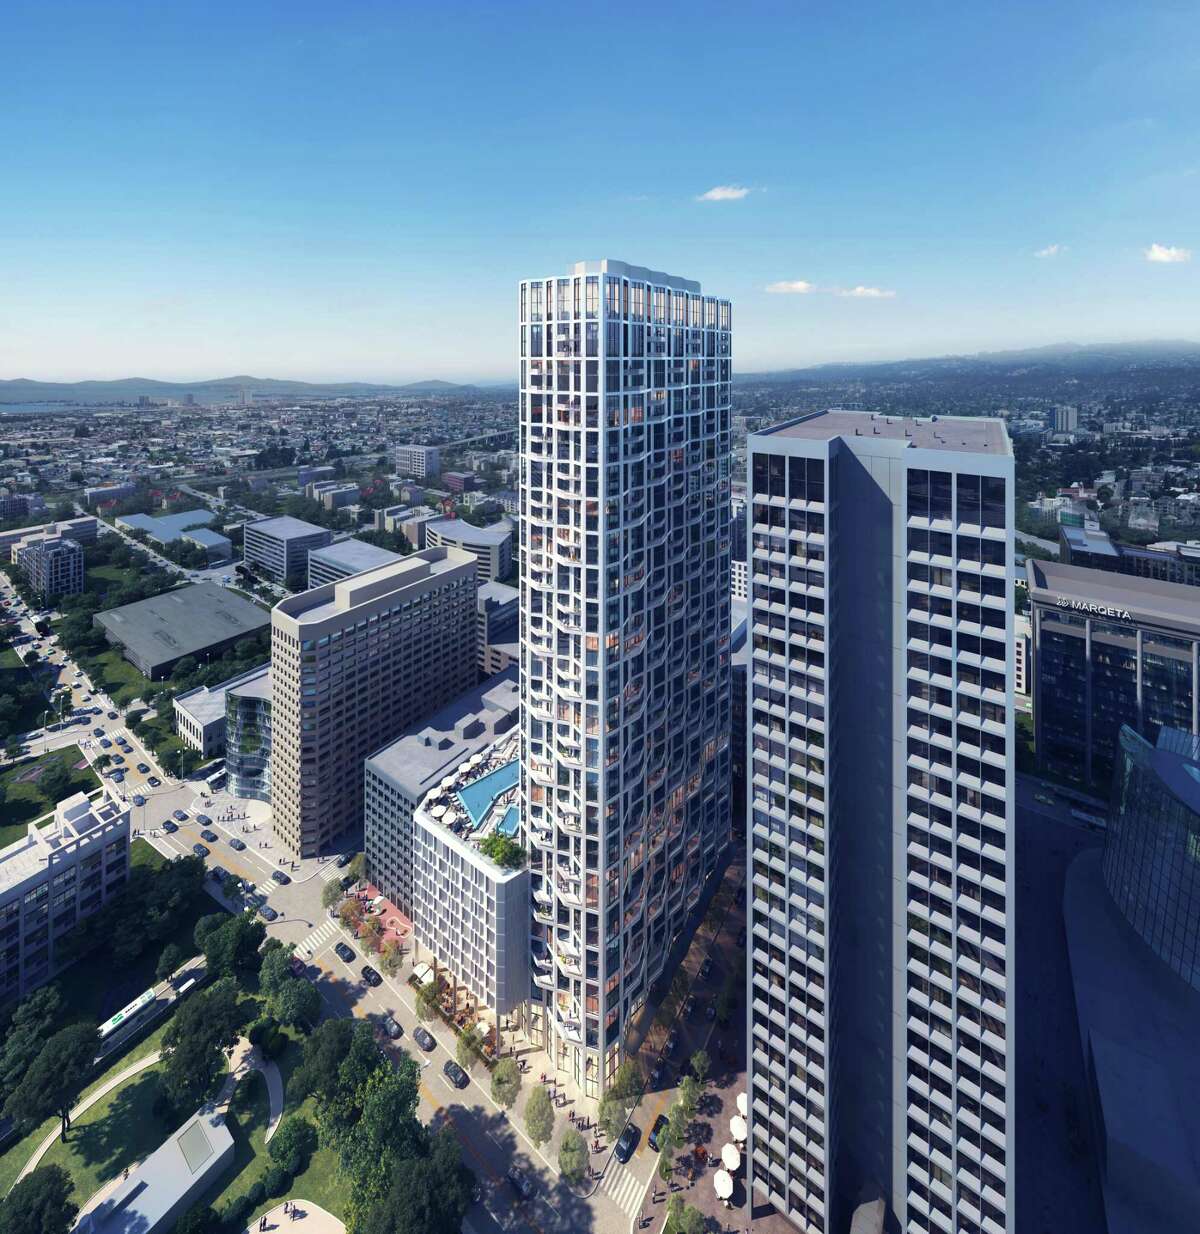 A rendering of a proposed Oakland residential tower at 325 22nd St. that would be the city's tallest.